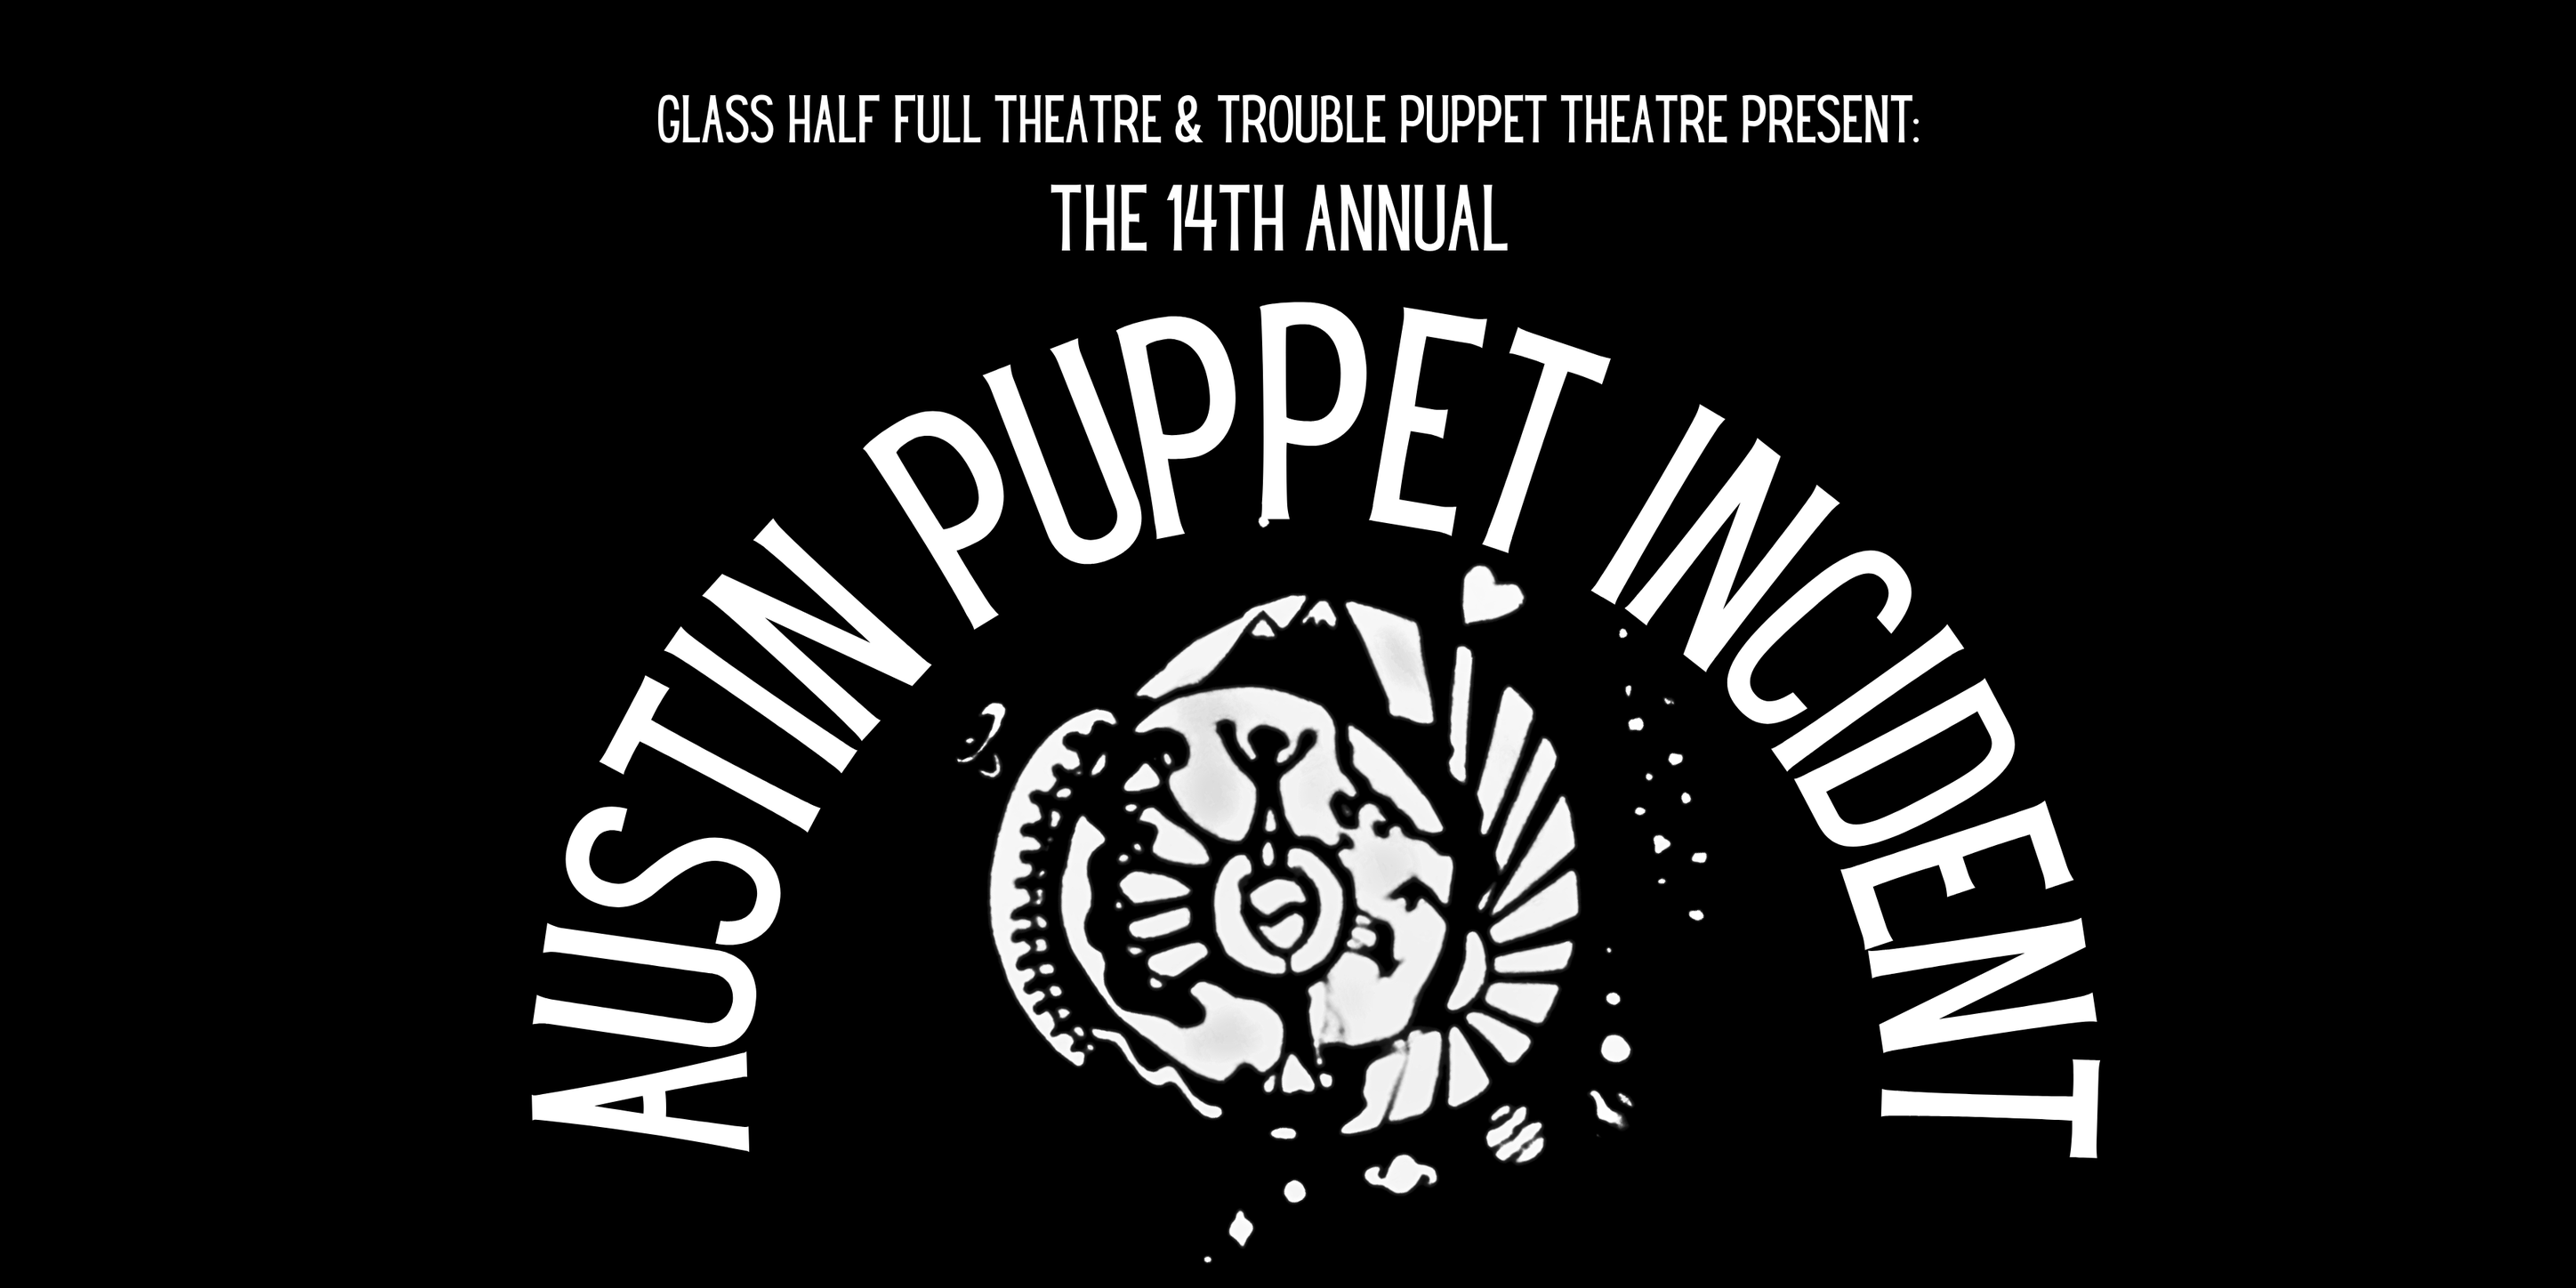 Austin Puppet Incident by Glass Half Full Theatre